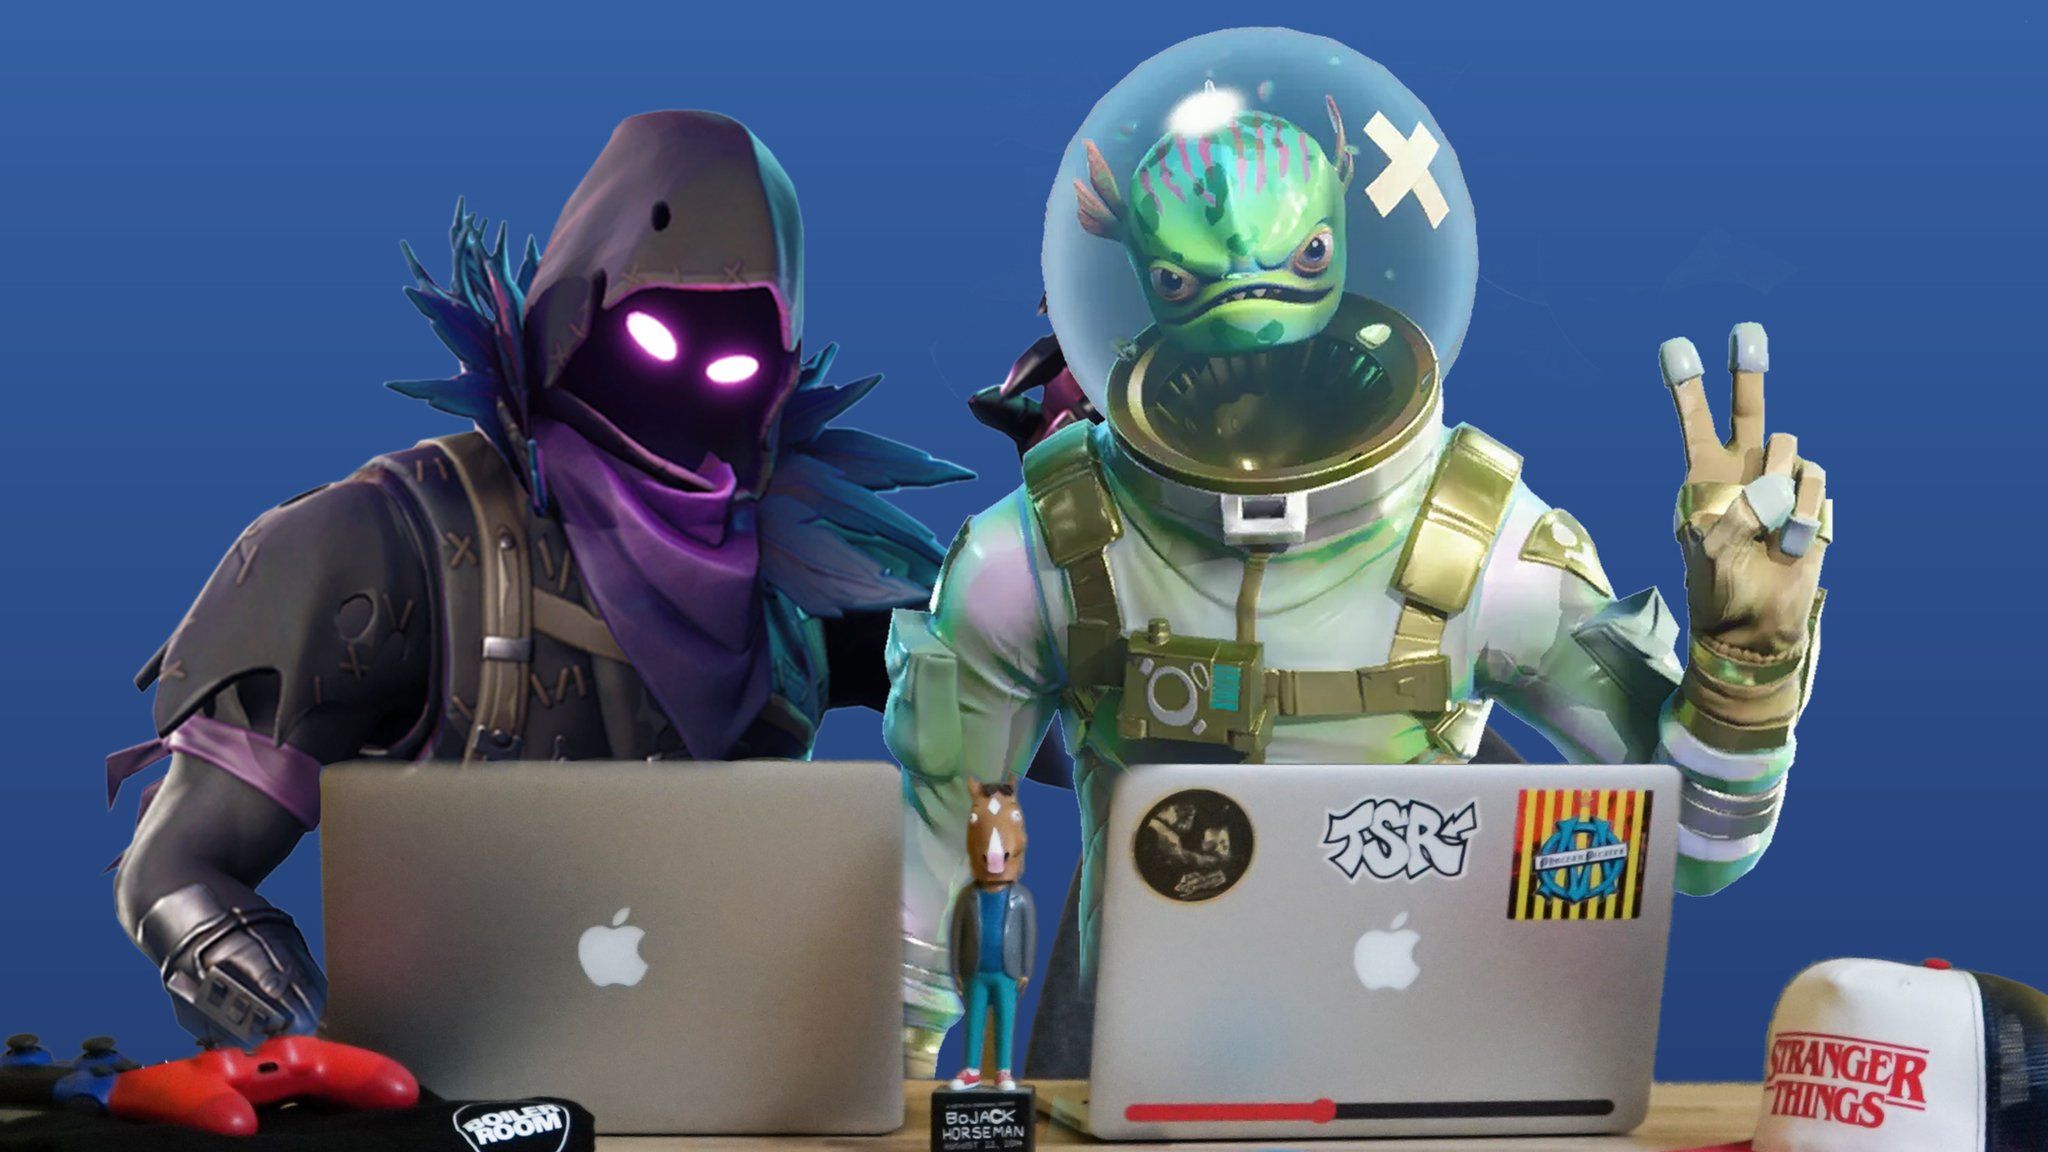 Fortnite characters on laptops